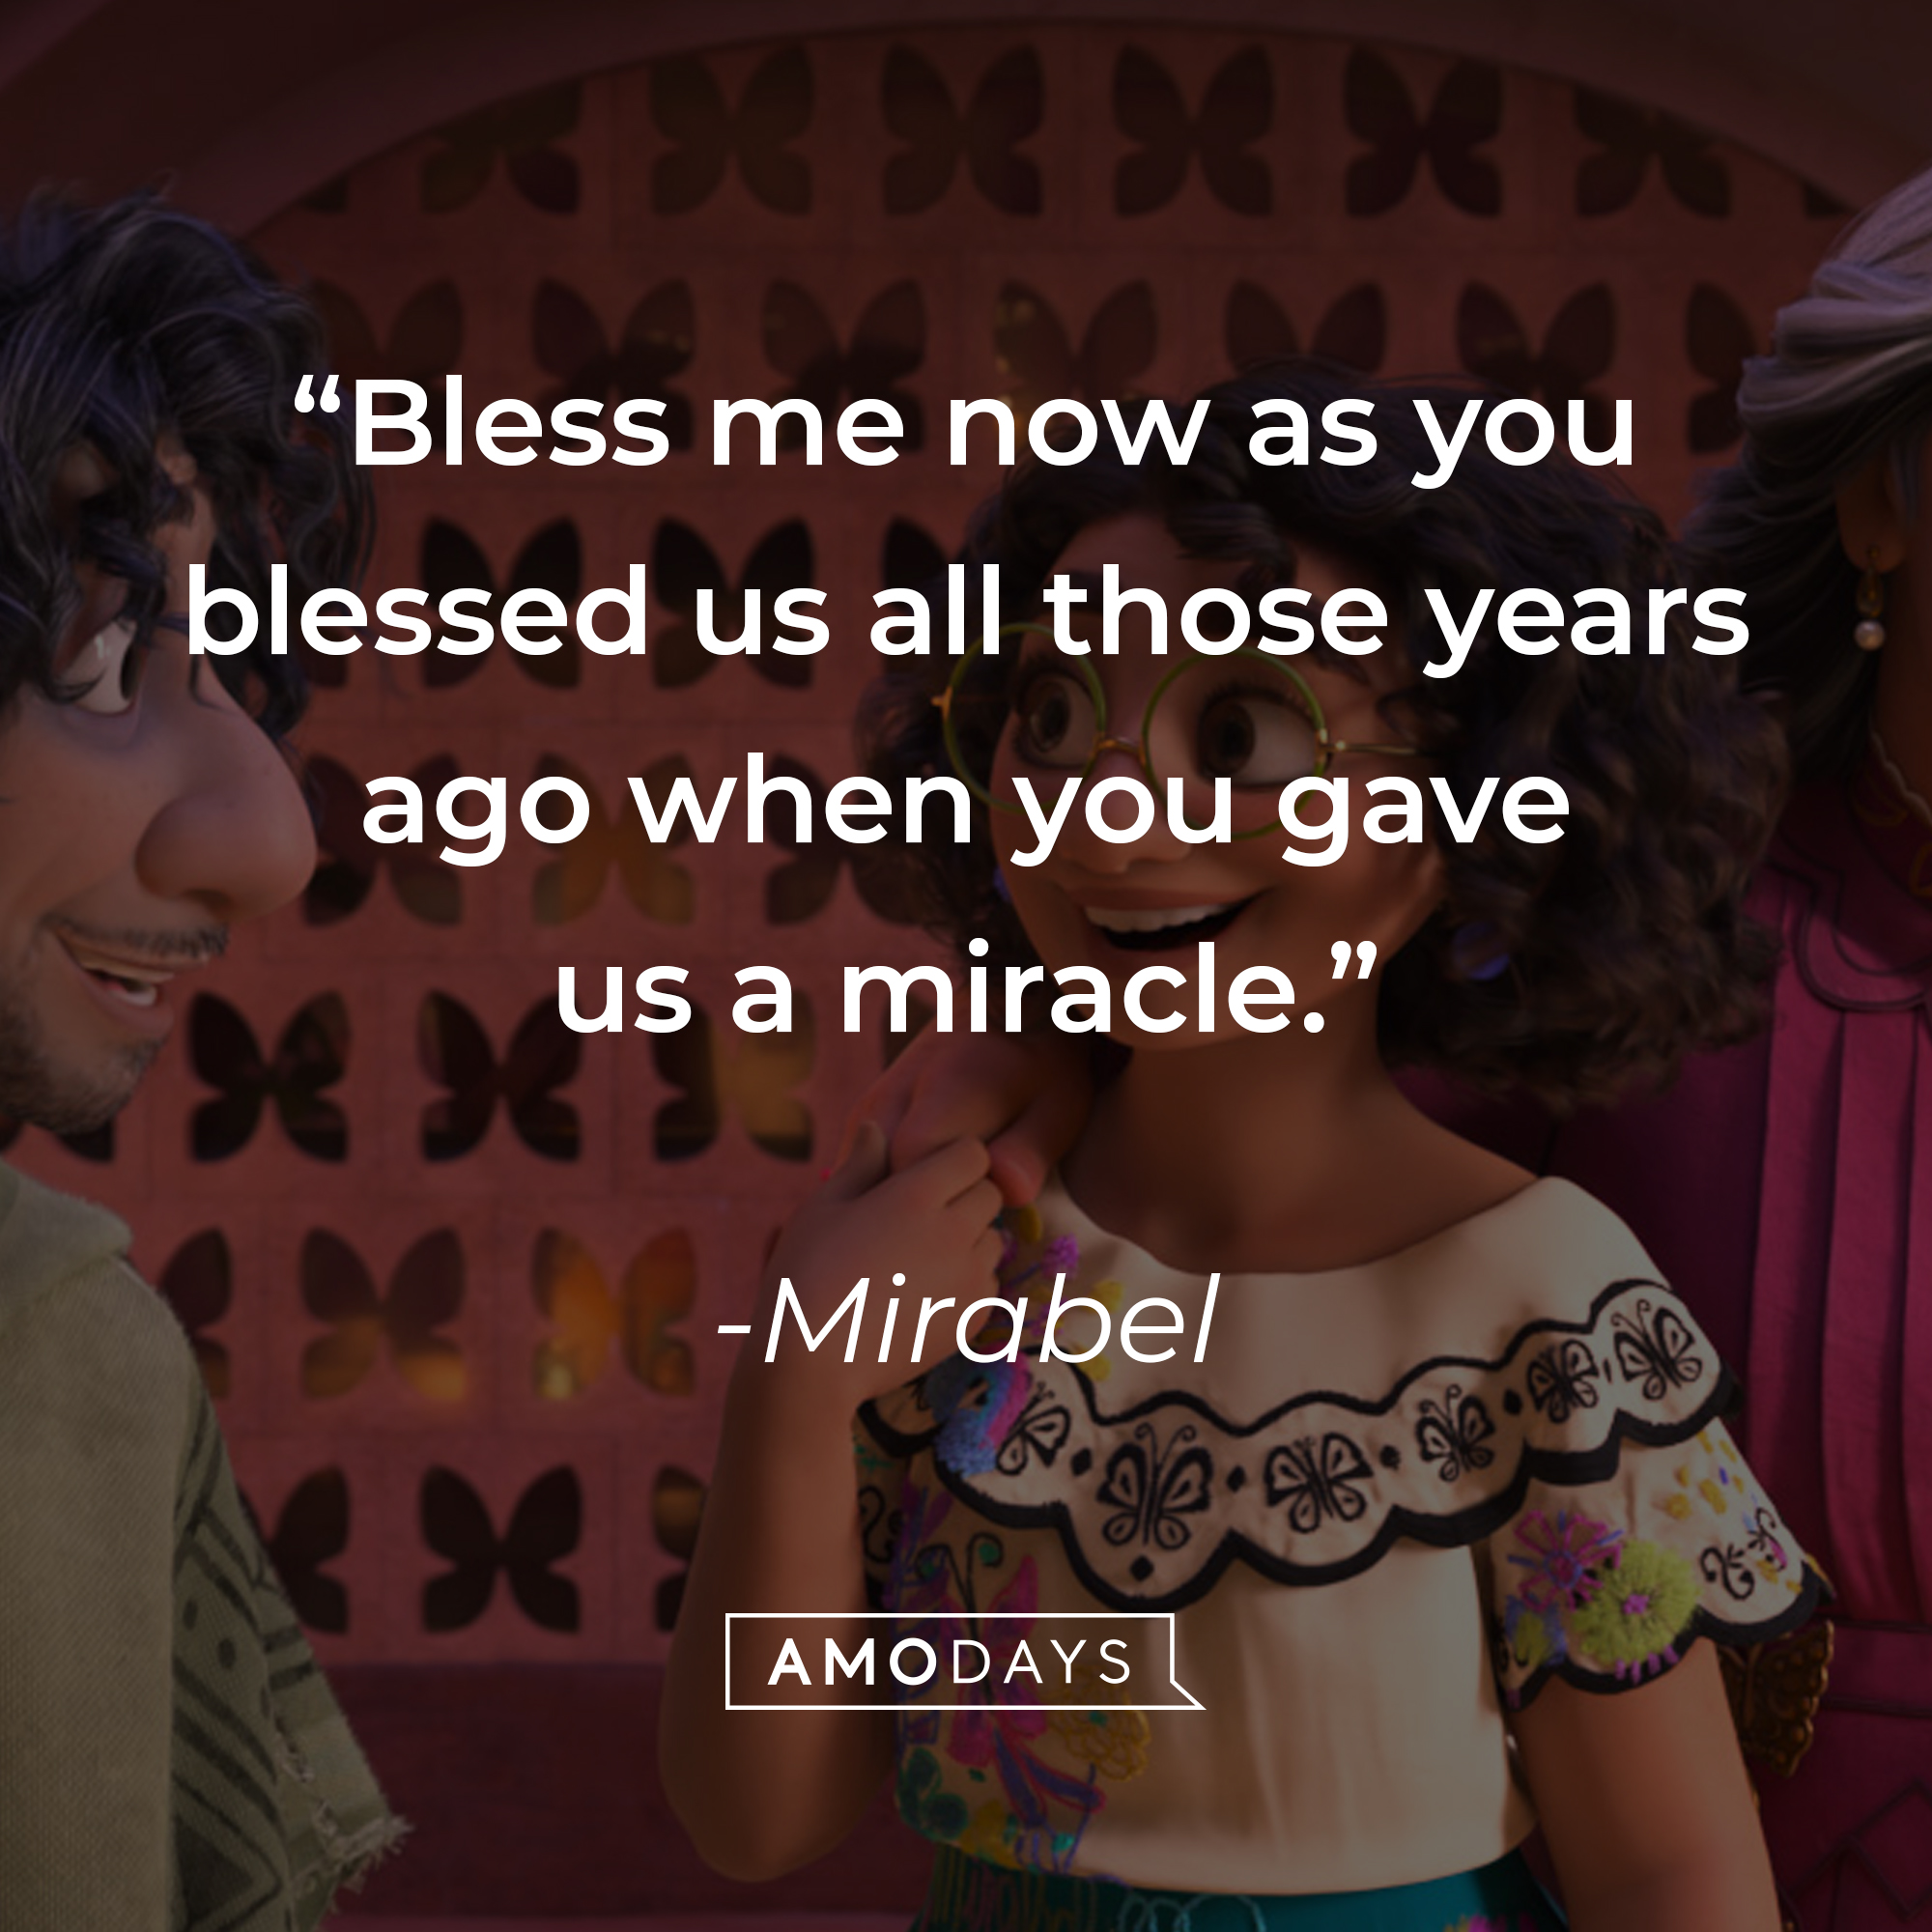 Mirabel's quote: "Bless me now as you blessed us all those years ago when you gave us a miracle." | Source: Facebook.com/EncantoMovie